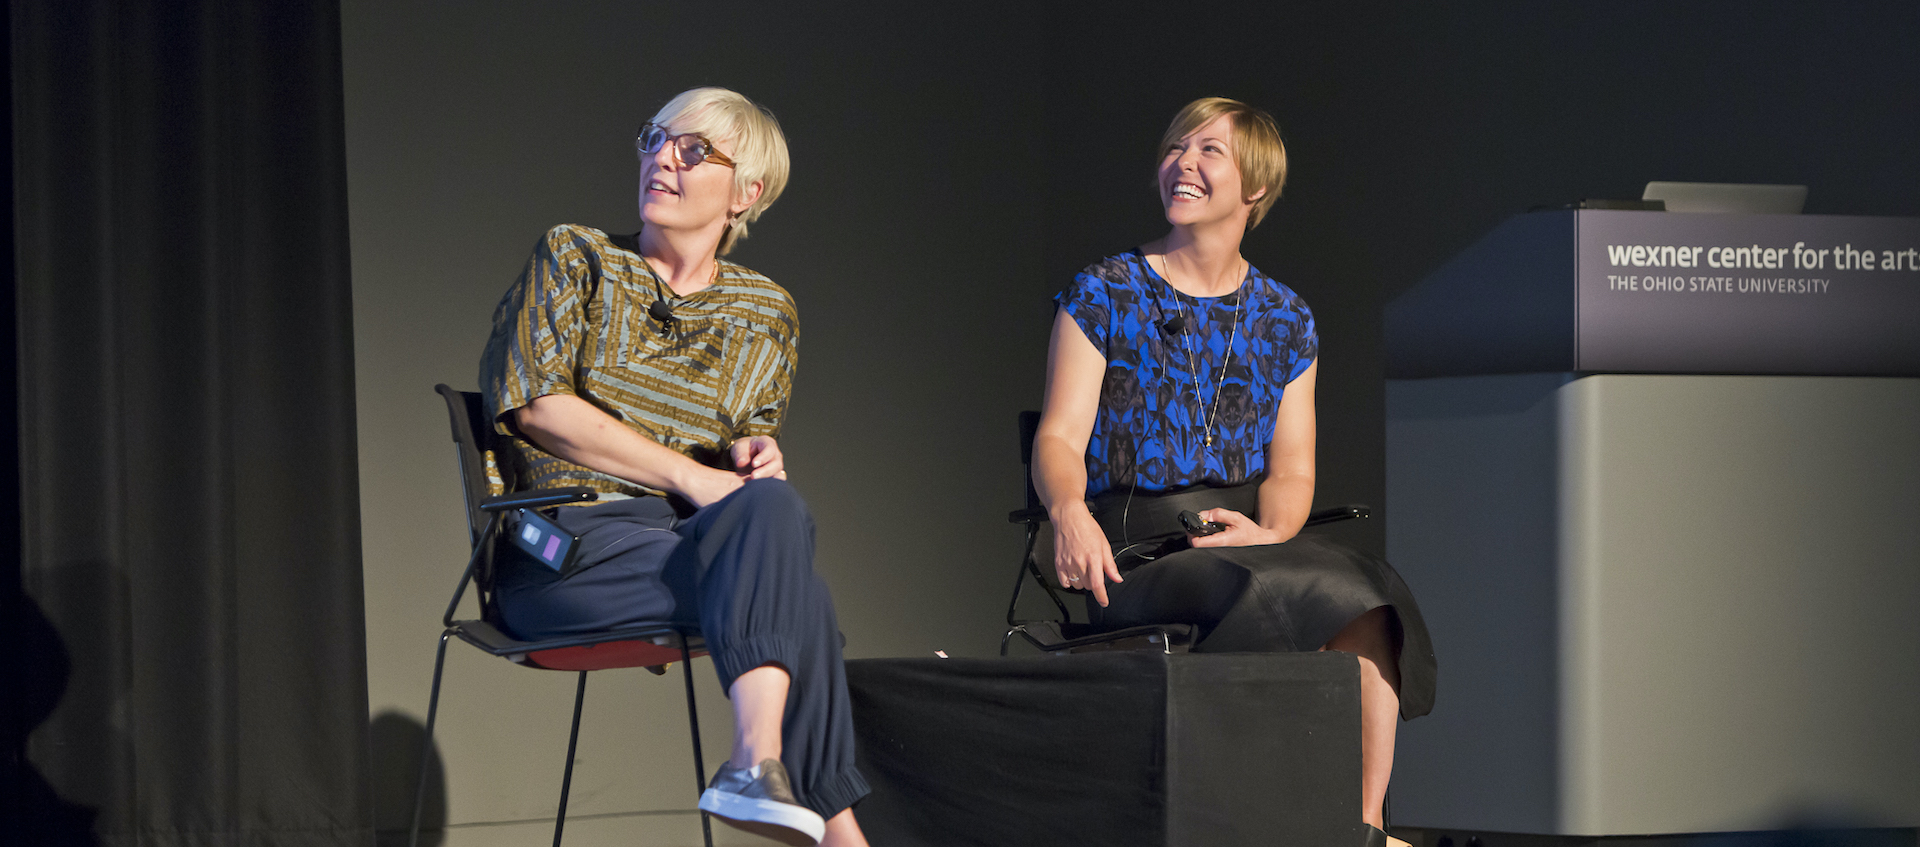 Helen Molesworth and Ruth Erickson at the Wexner Center for the Arts